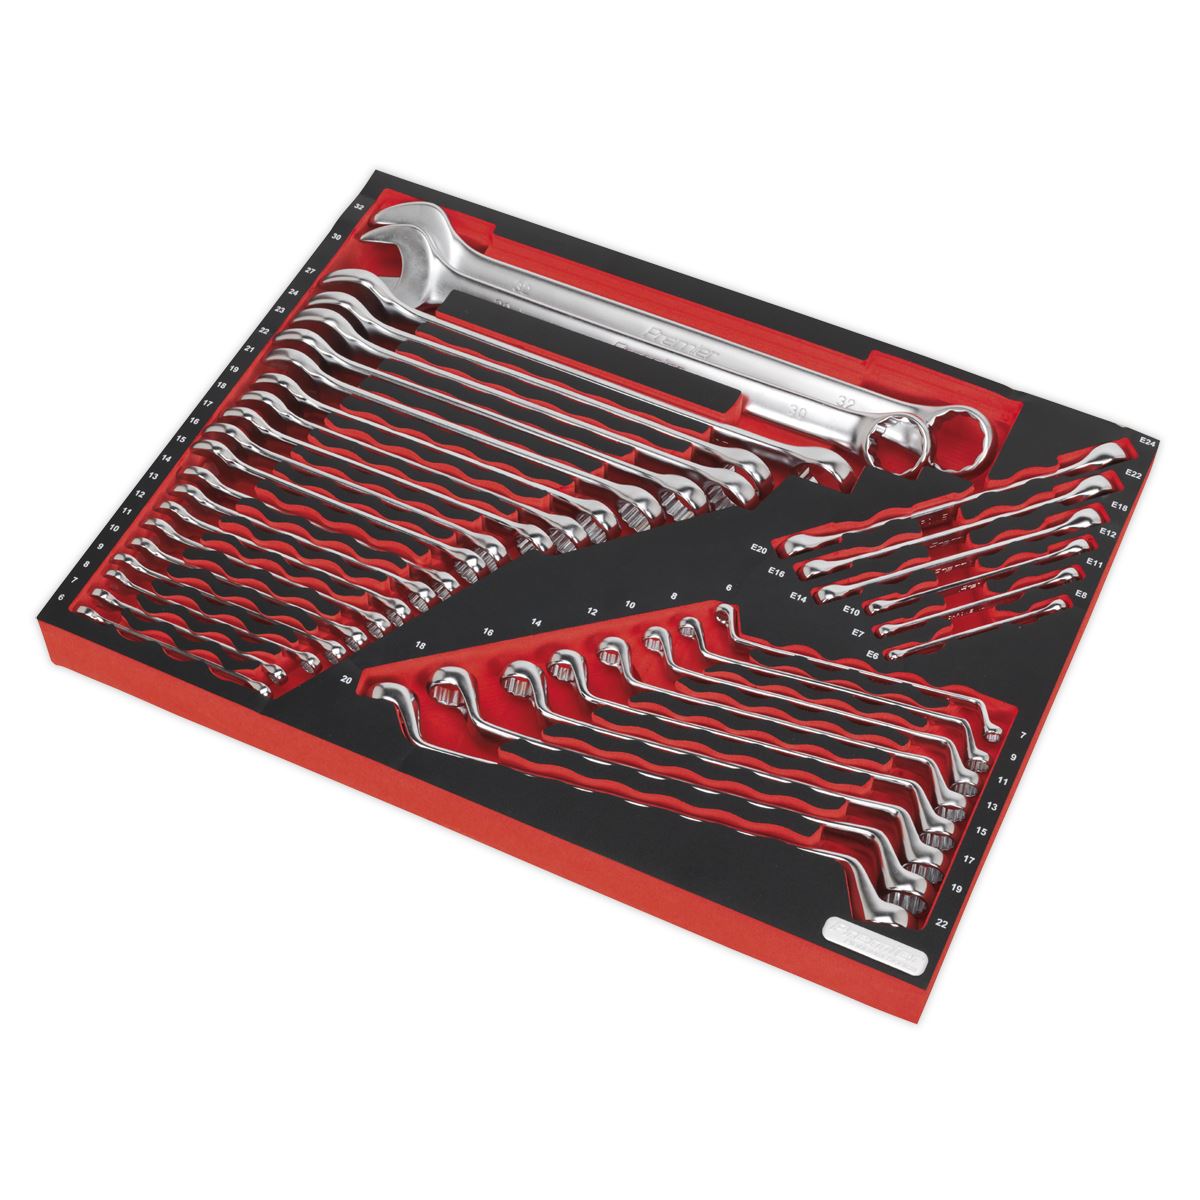 Sealey Premier Platinum Tool Tray with Spanner Set 35pc